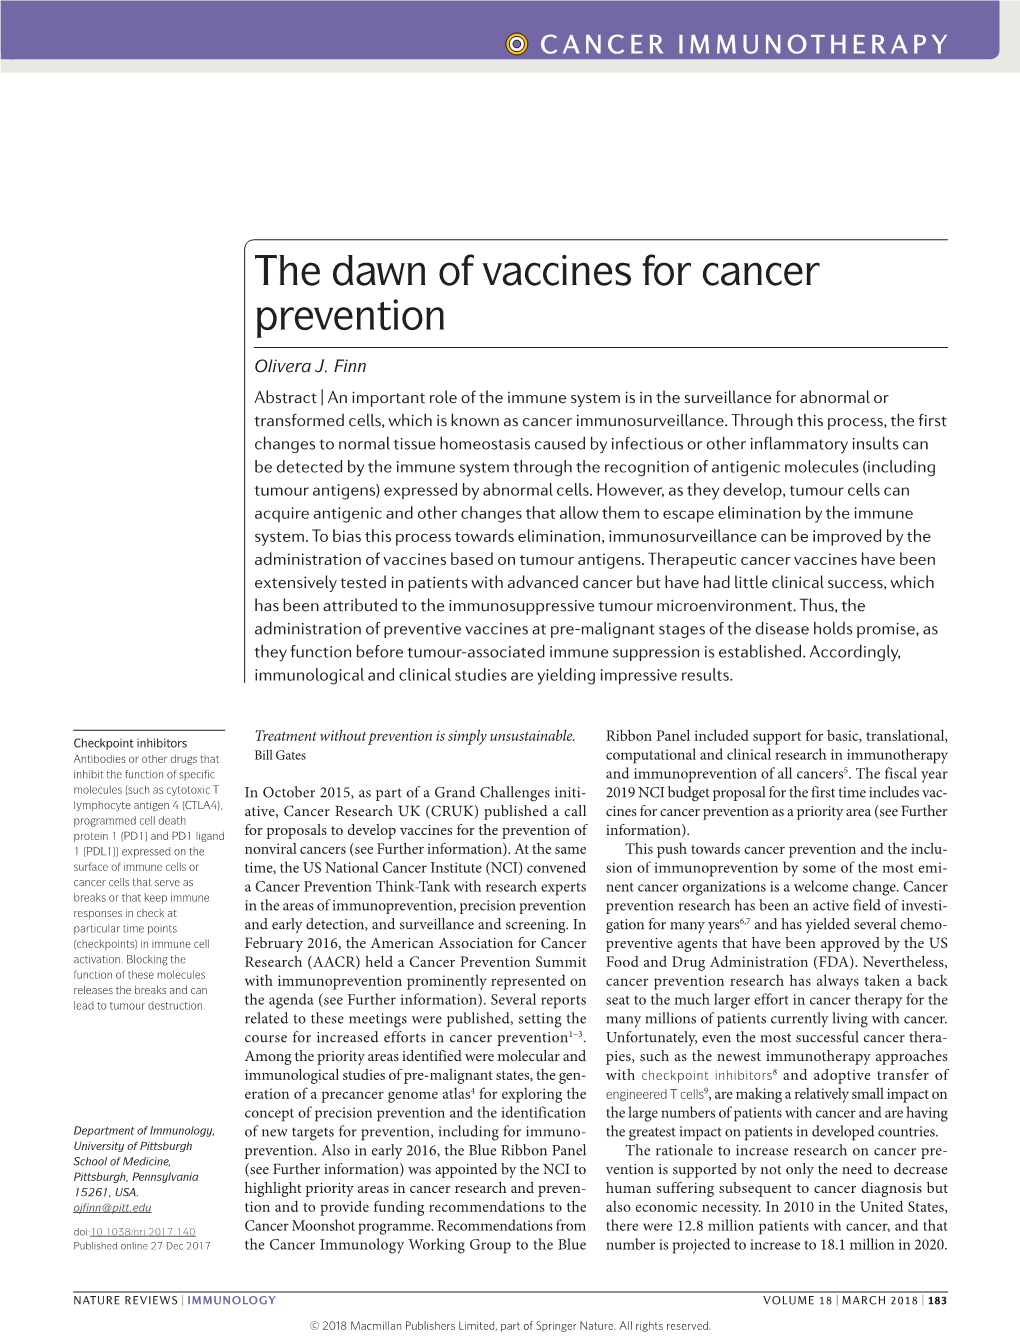 The Dawn of Vaccines for Cancer Prevention